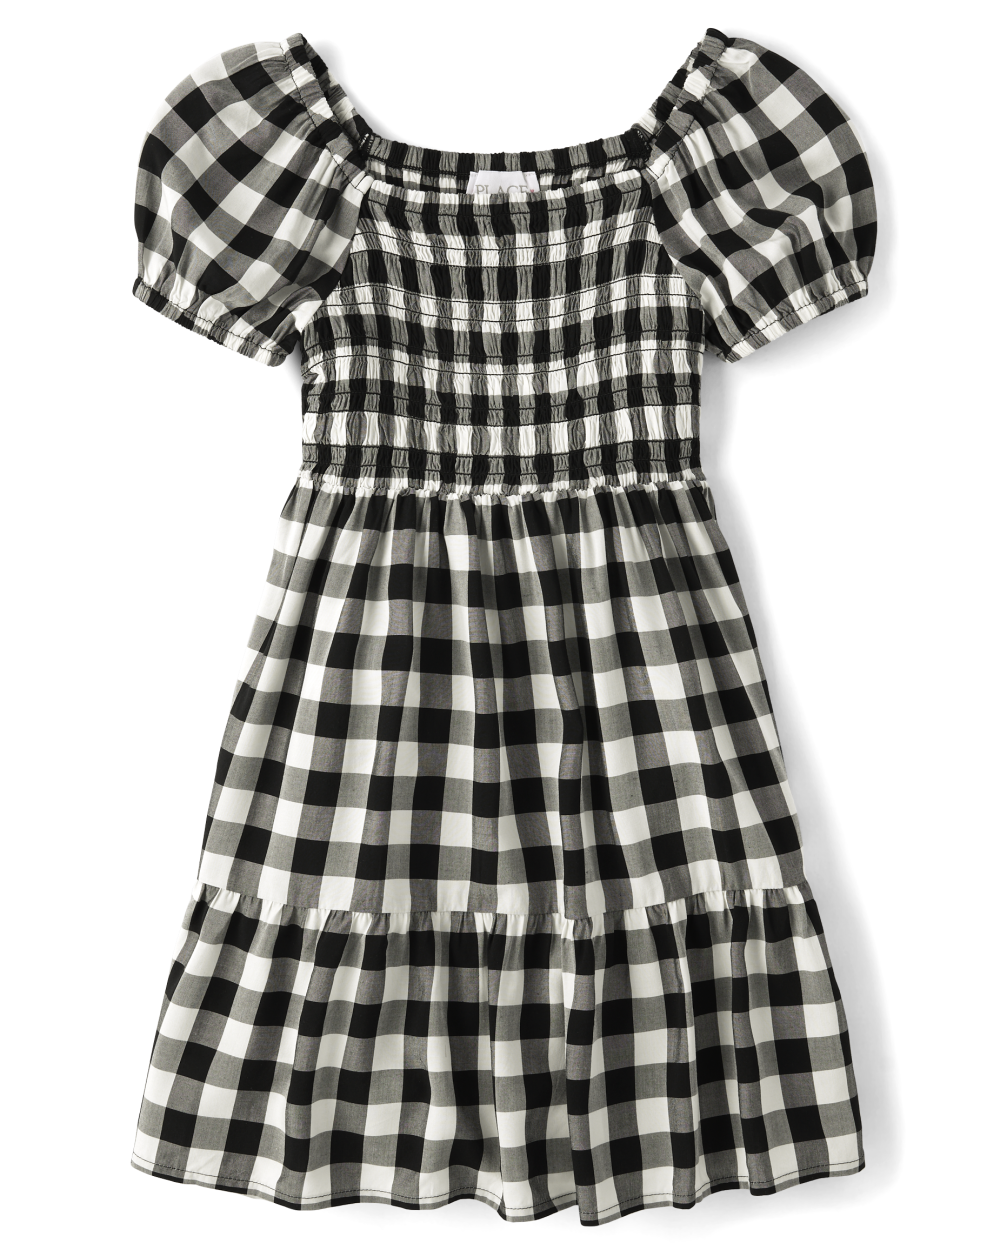 Girls Rayon Above the Knee Puff Sleeves Short Sleeves Sleeves Checkered Gingham Print Smocked Square Neck Dress With Ruffles